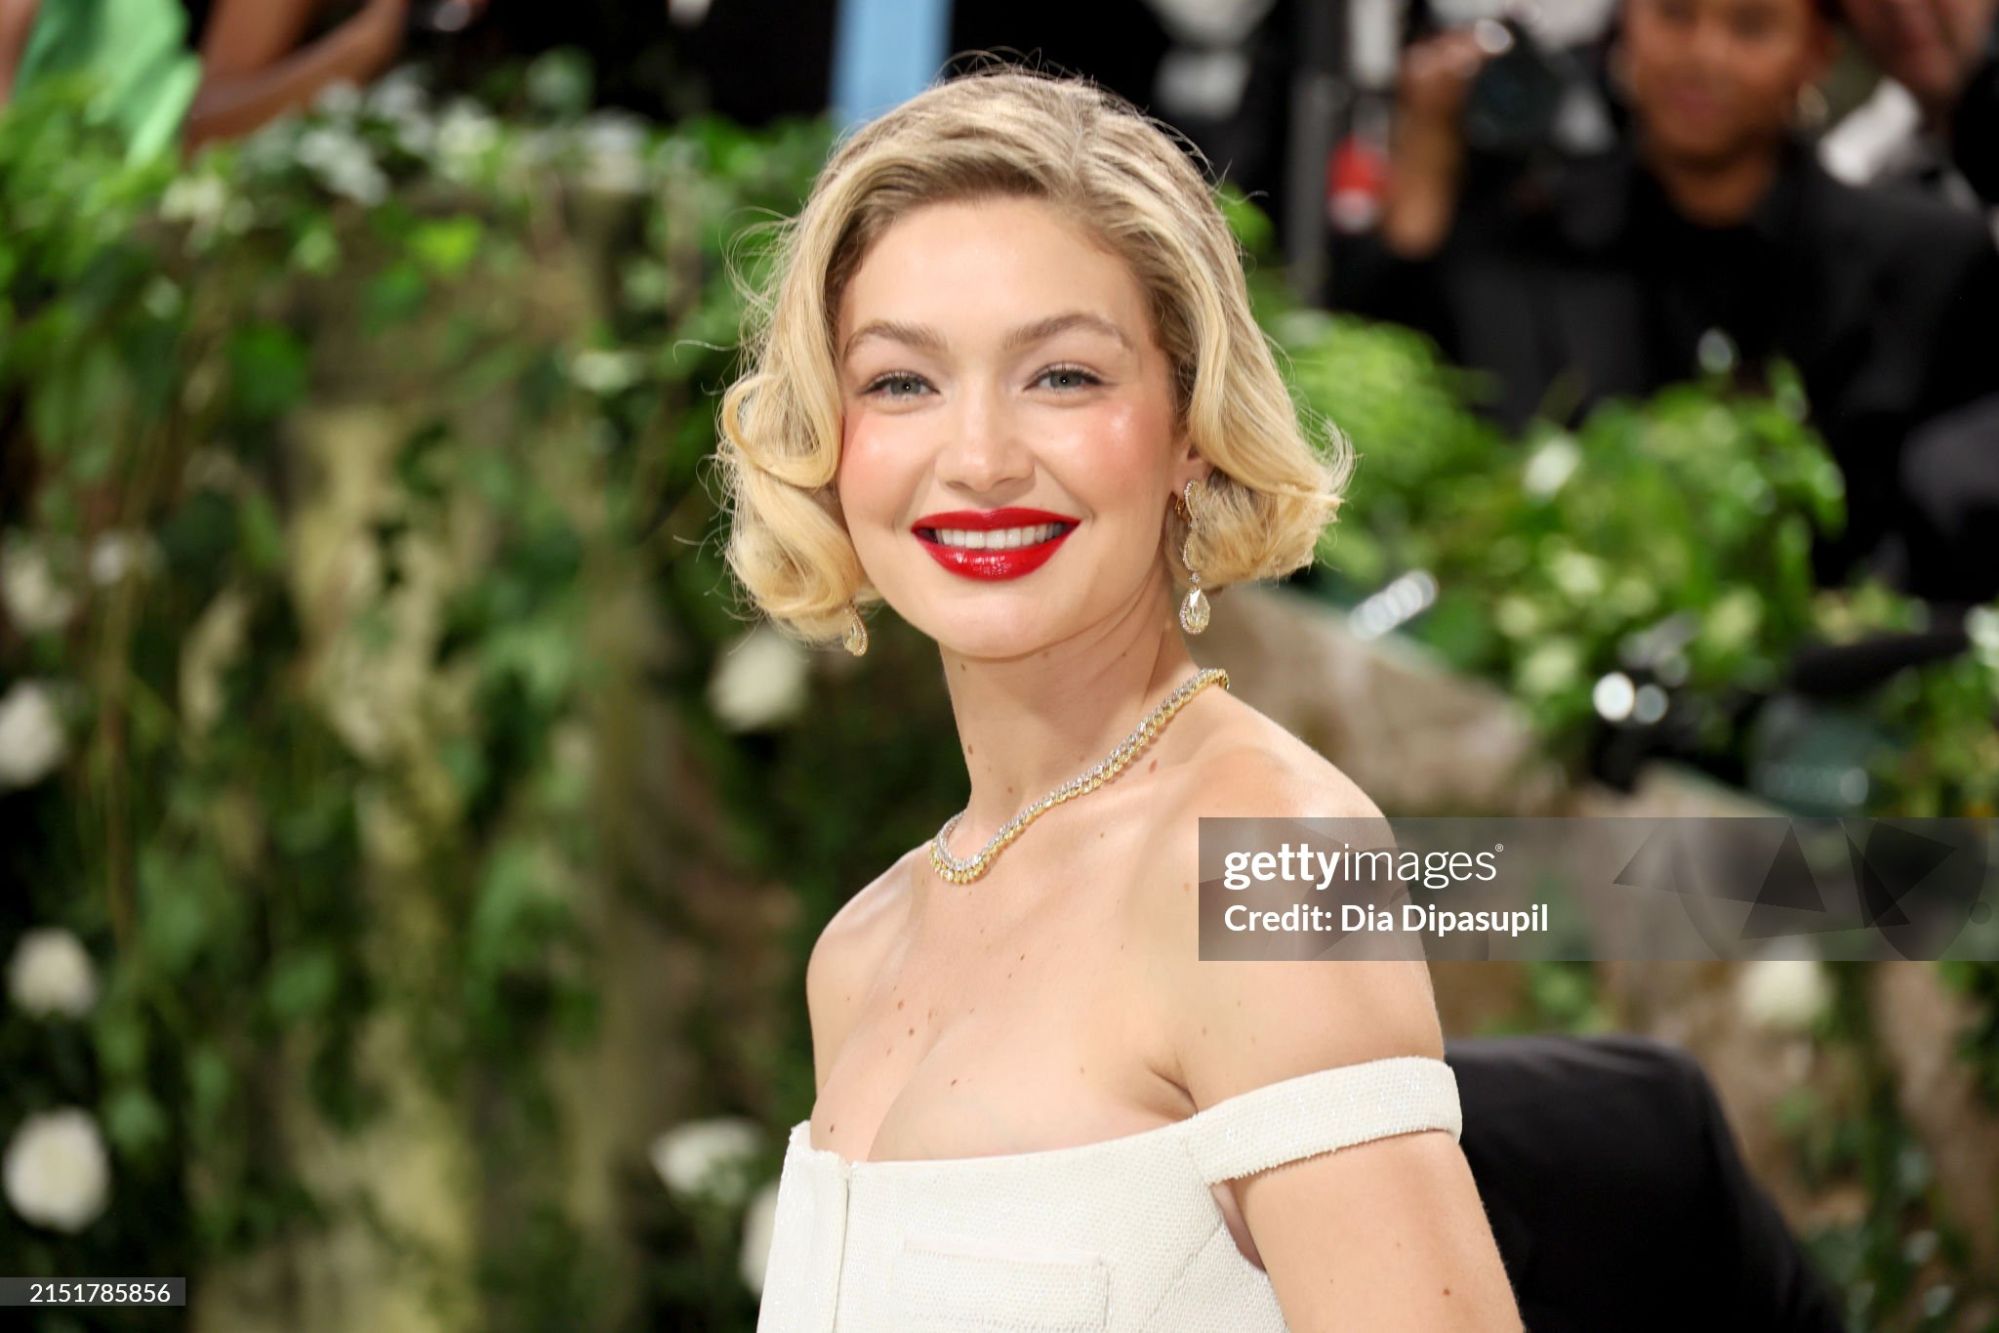 gettyimages-2151785856-2048x2048.jpg